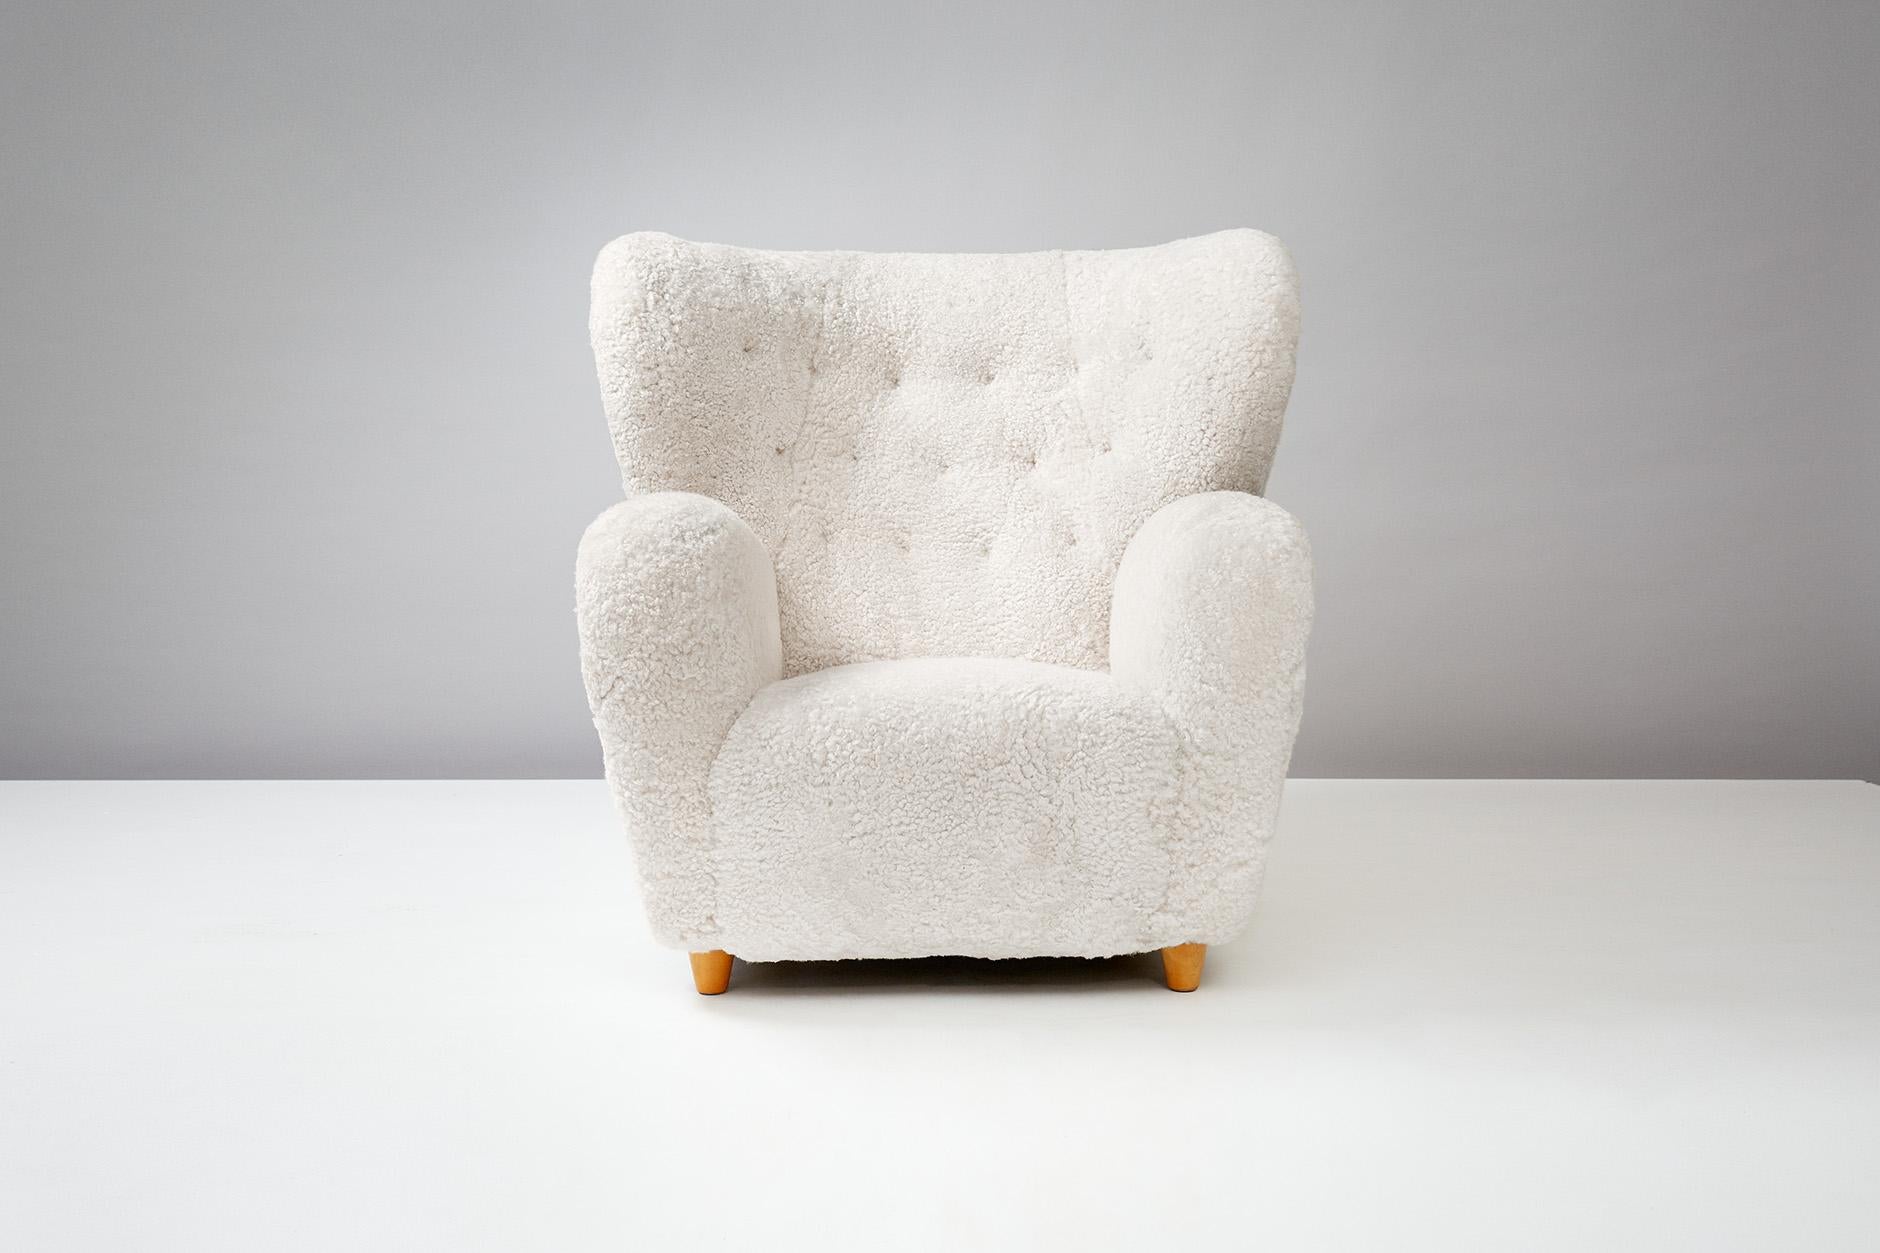 Märta Blomstedt

Lounge chair, 1939

Rare design by Finnish architect Marta Blomstedt for the Hotel Aulanko, Hameenlinna, Finland. Various iterations were produced for the hotel and also for local retailers over the subsequent decades. This